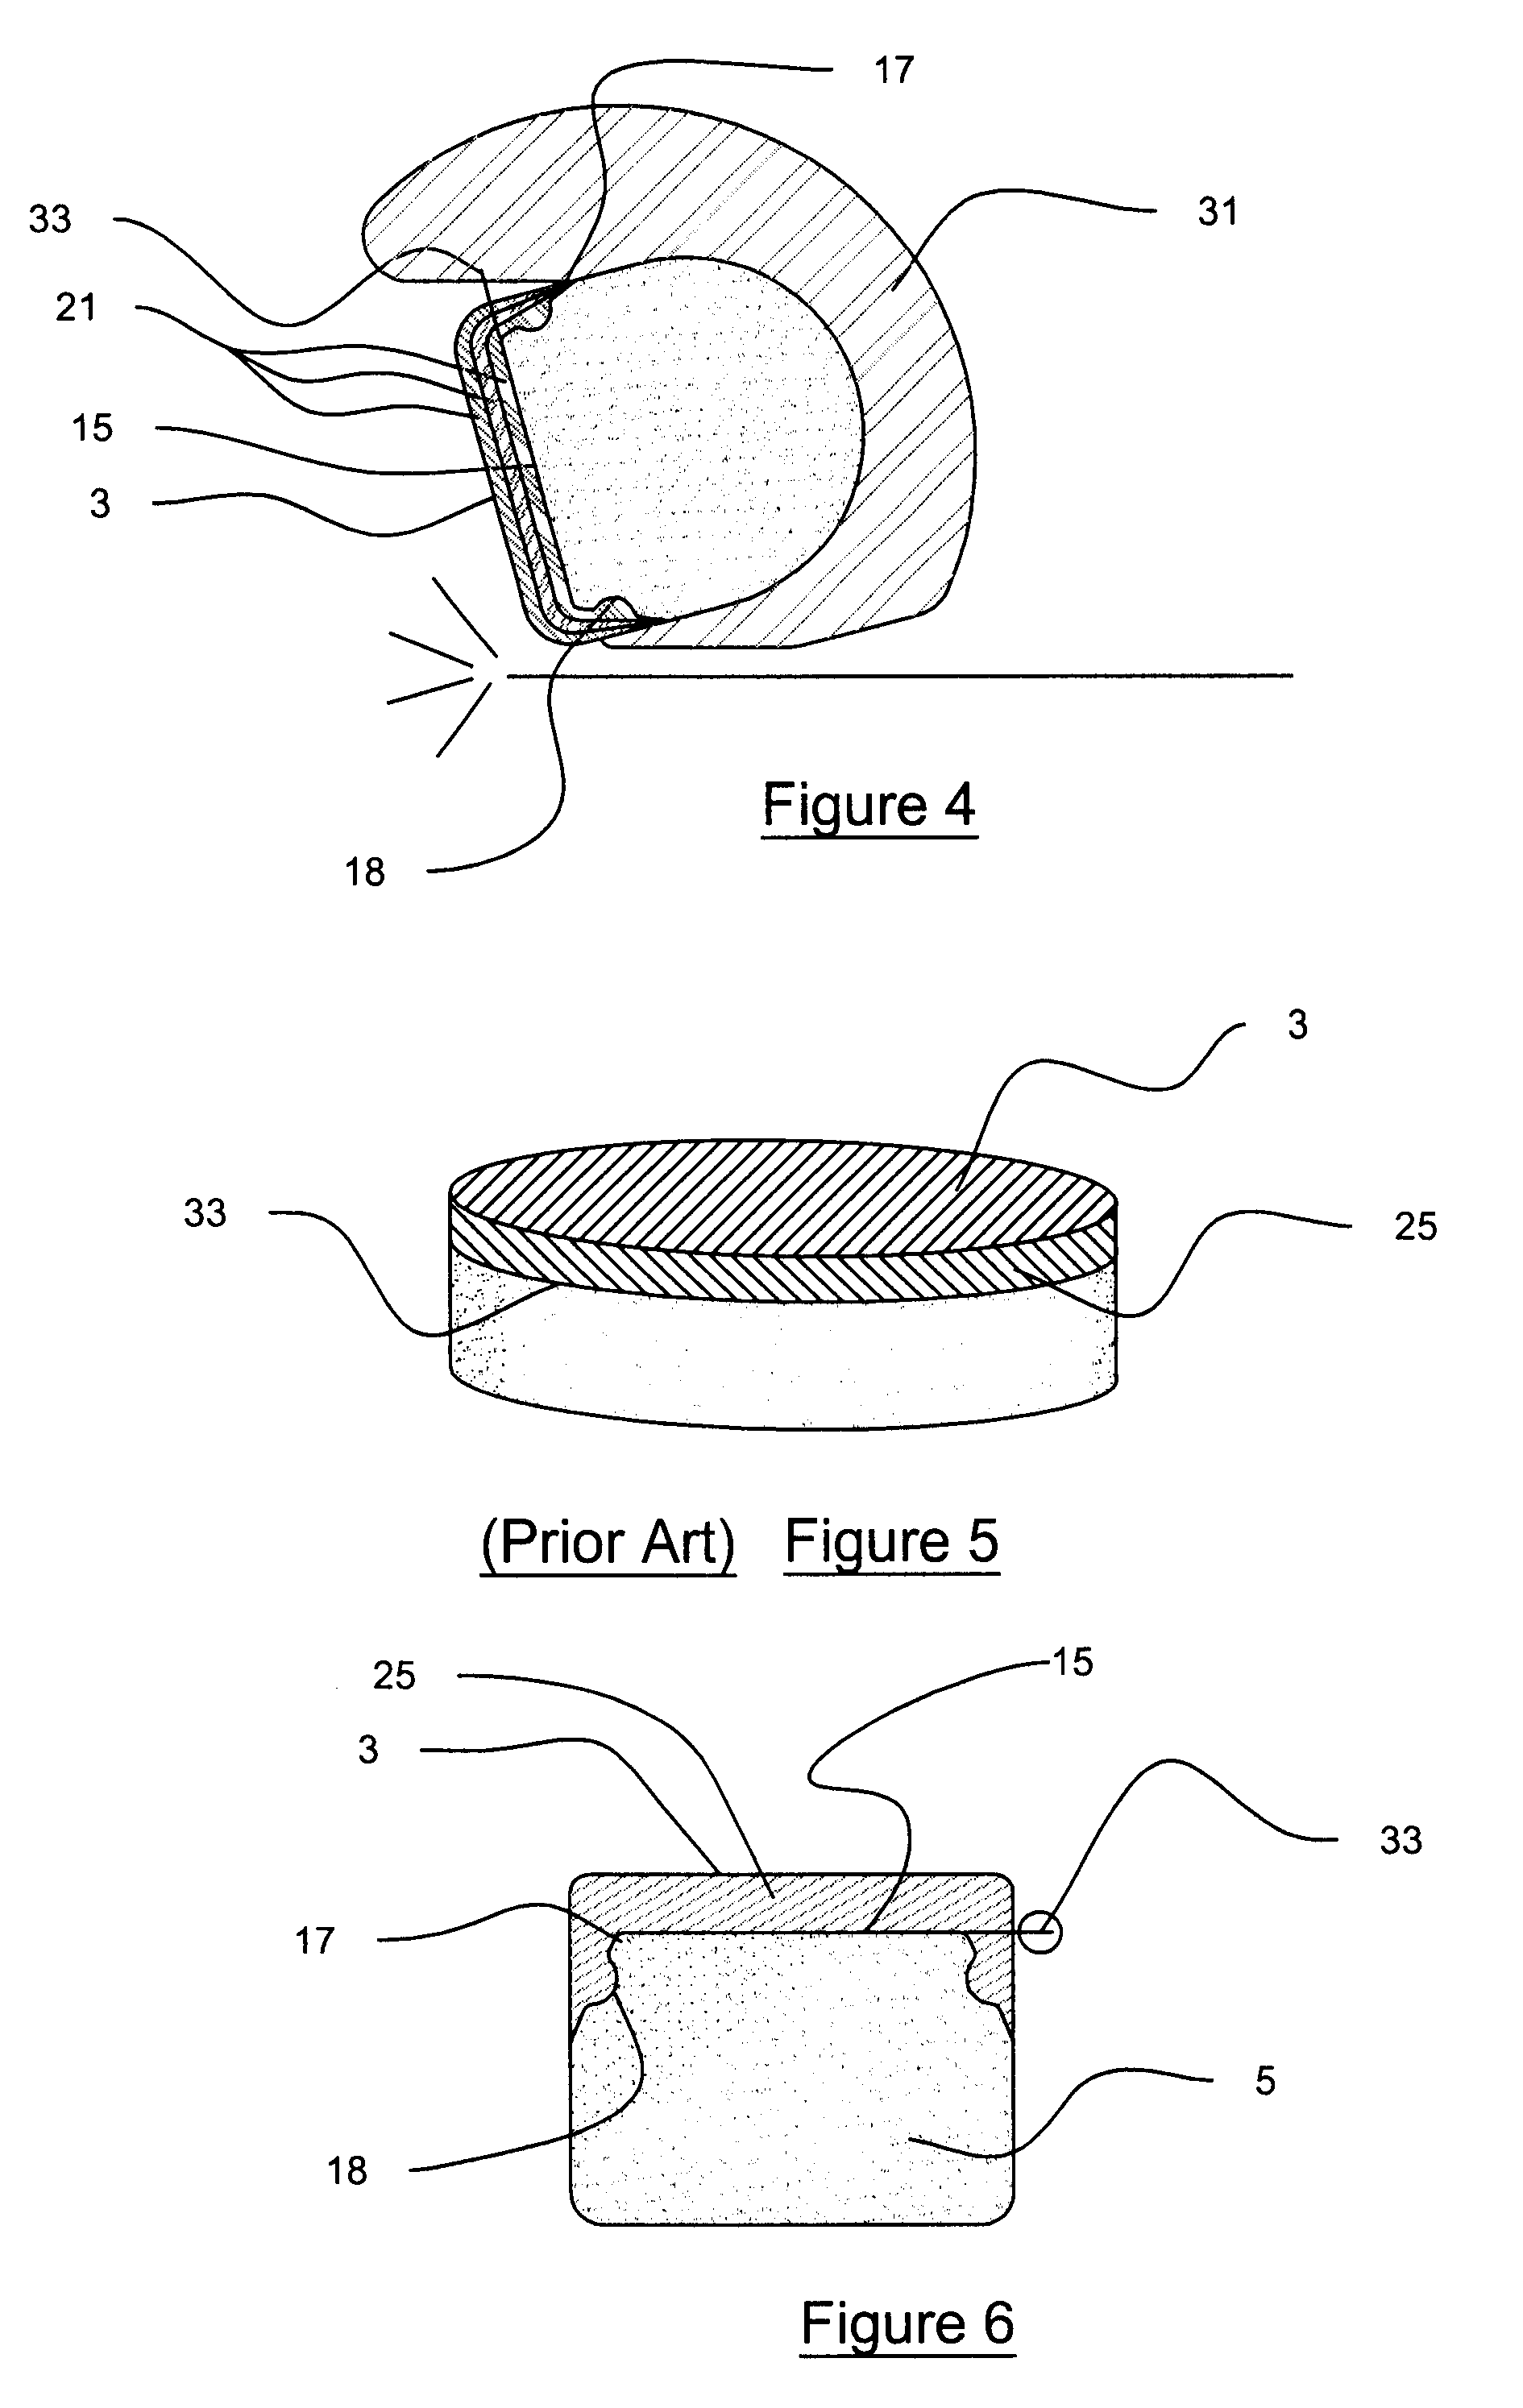 Superhard drill bit heel, gage, and cutting elements with reinforced periphery